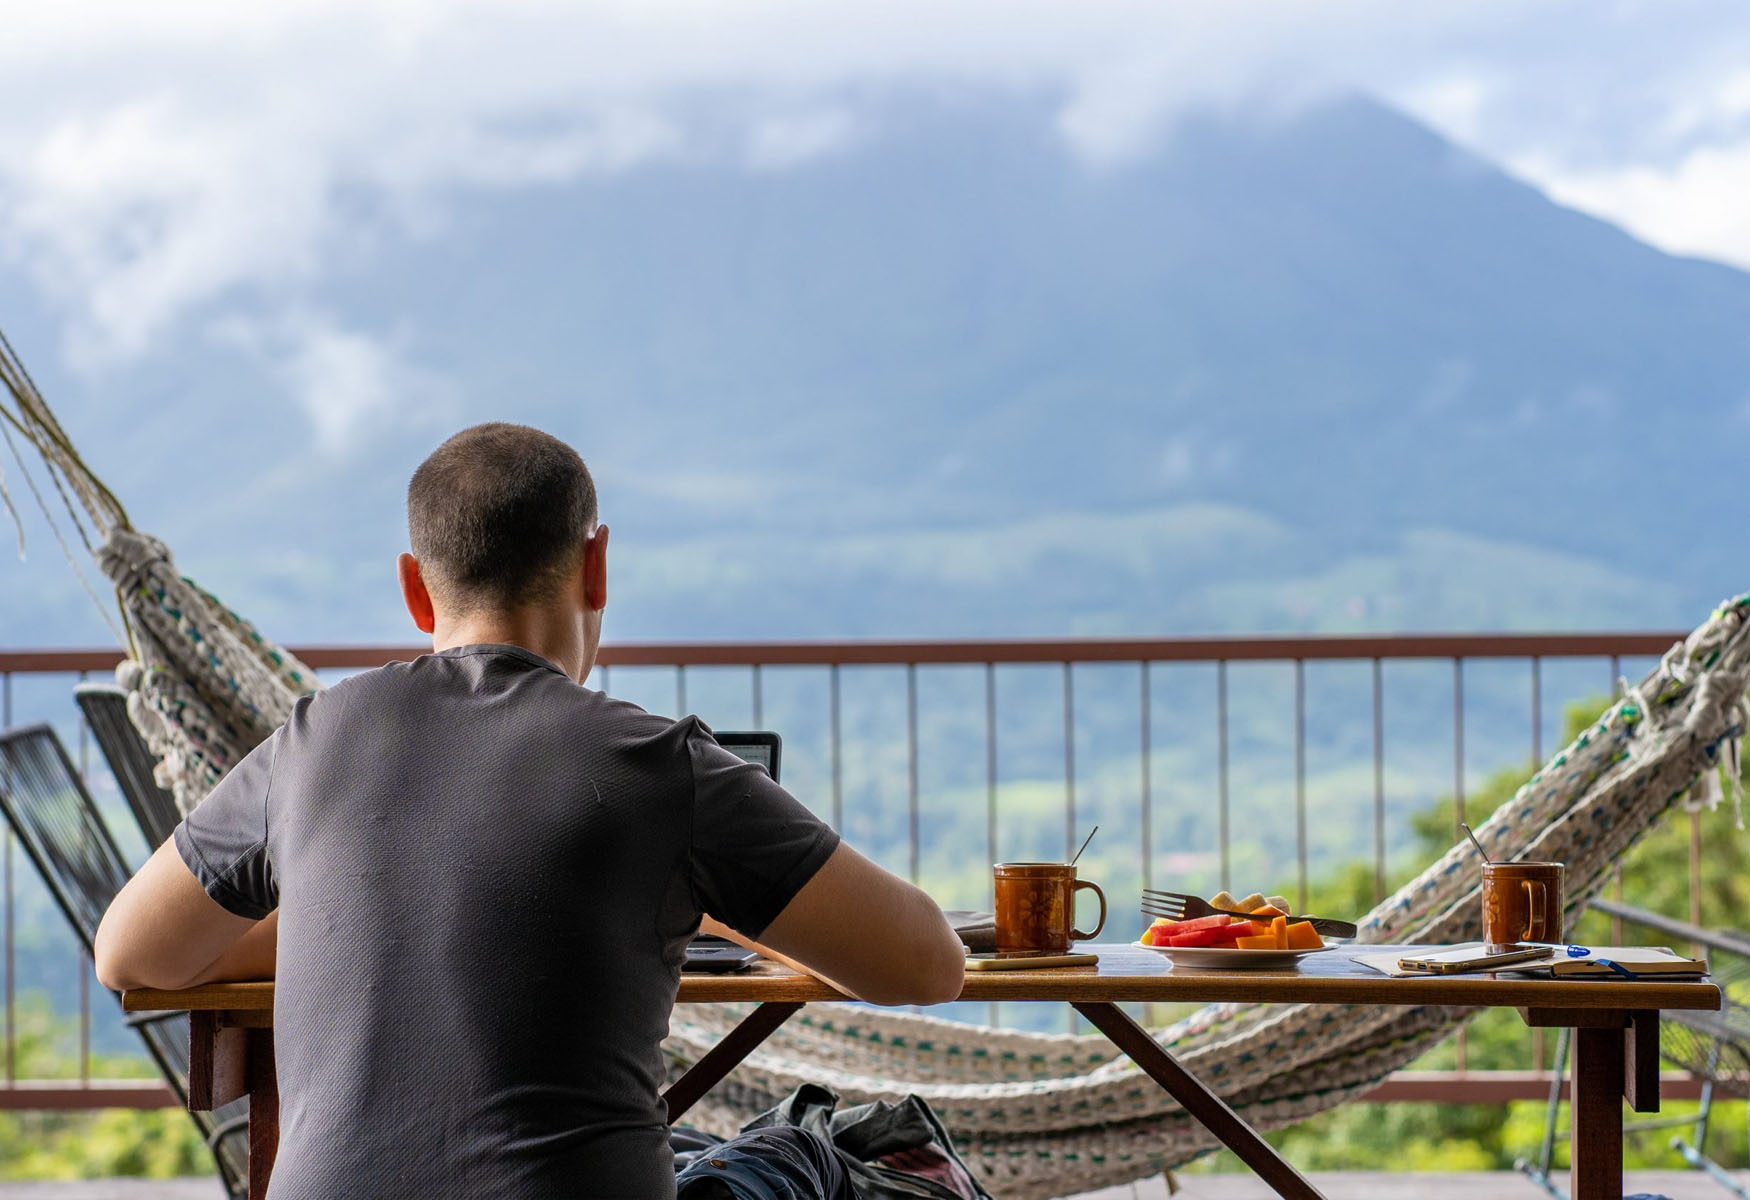 How To Become A Digital Nomad – Tips For Getting Started